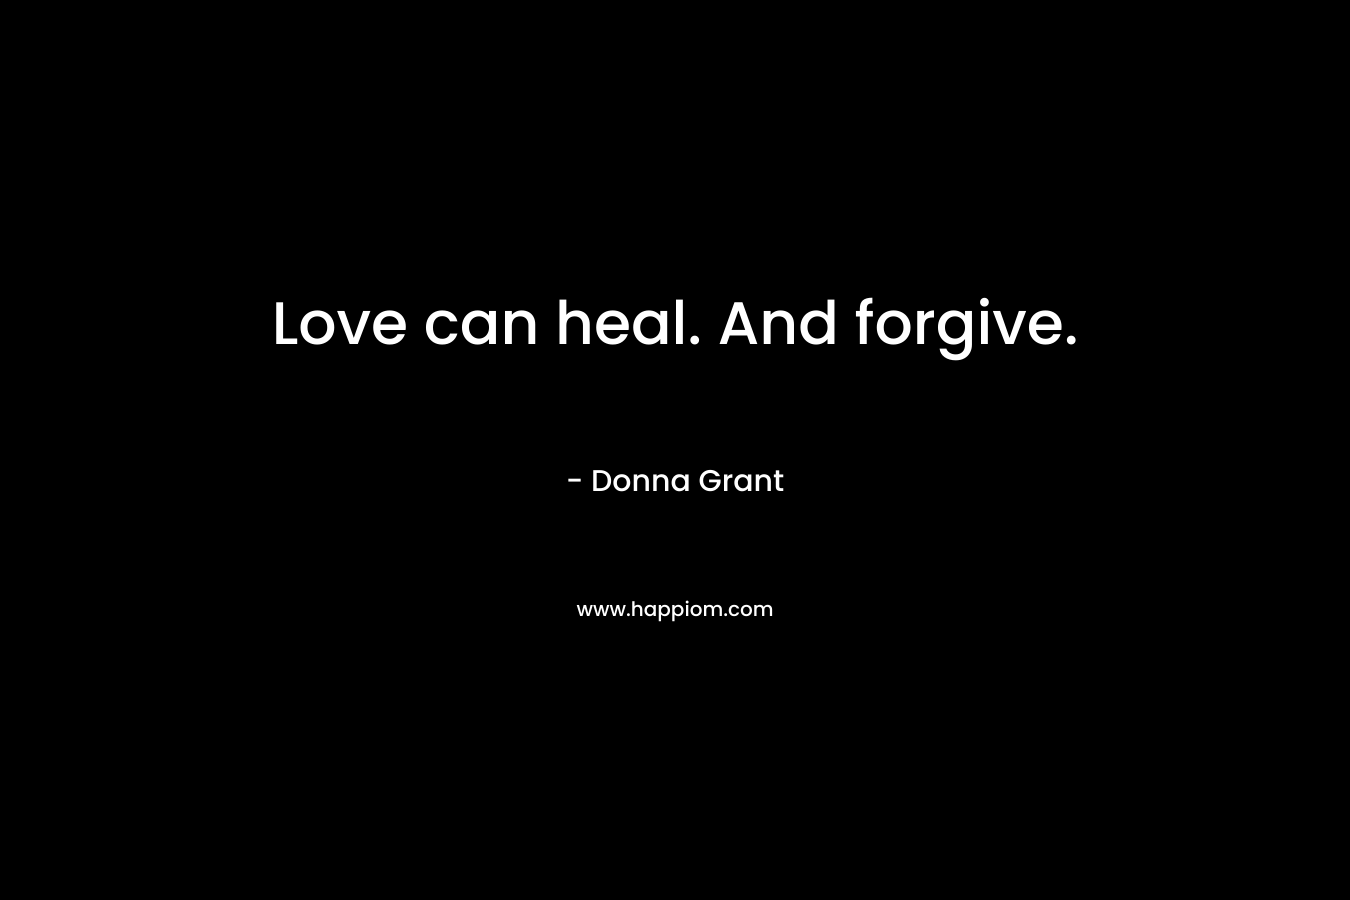 Love can heal. And forgive.